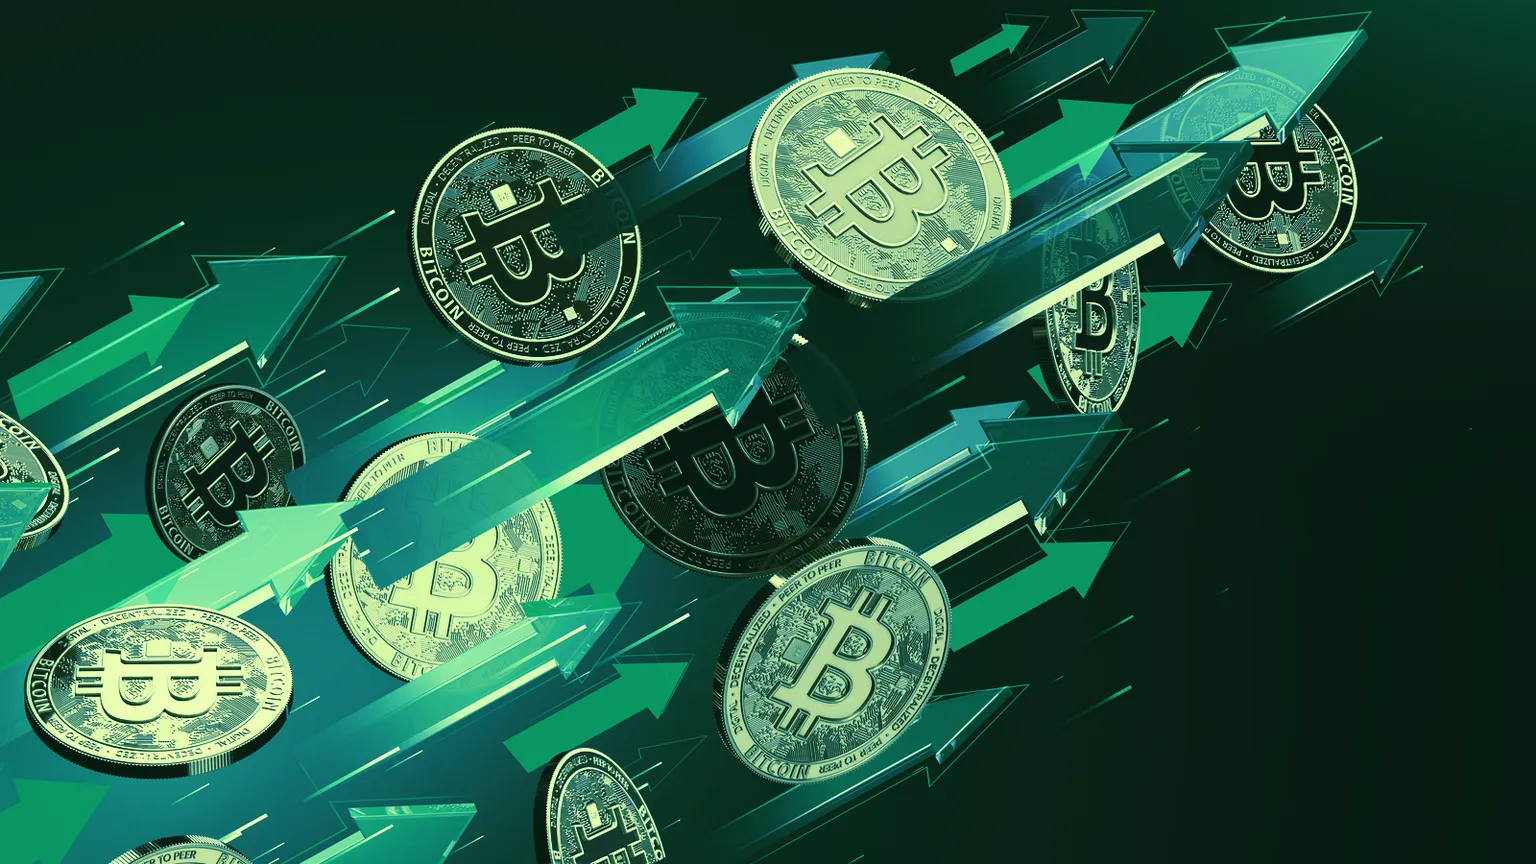 Bitcoin pushed markets into greener territory. Image: Shutterstock